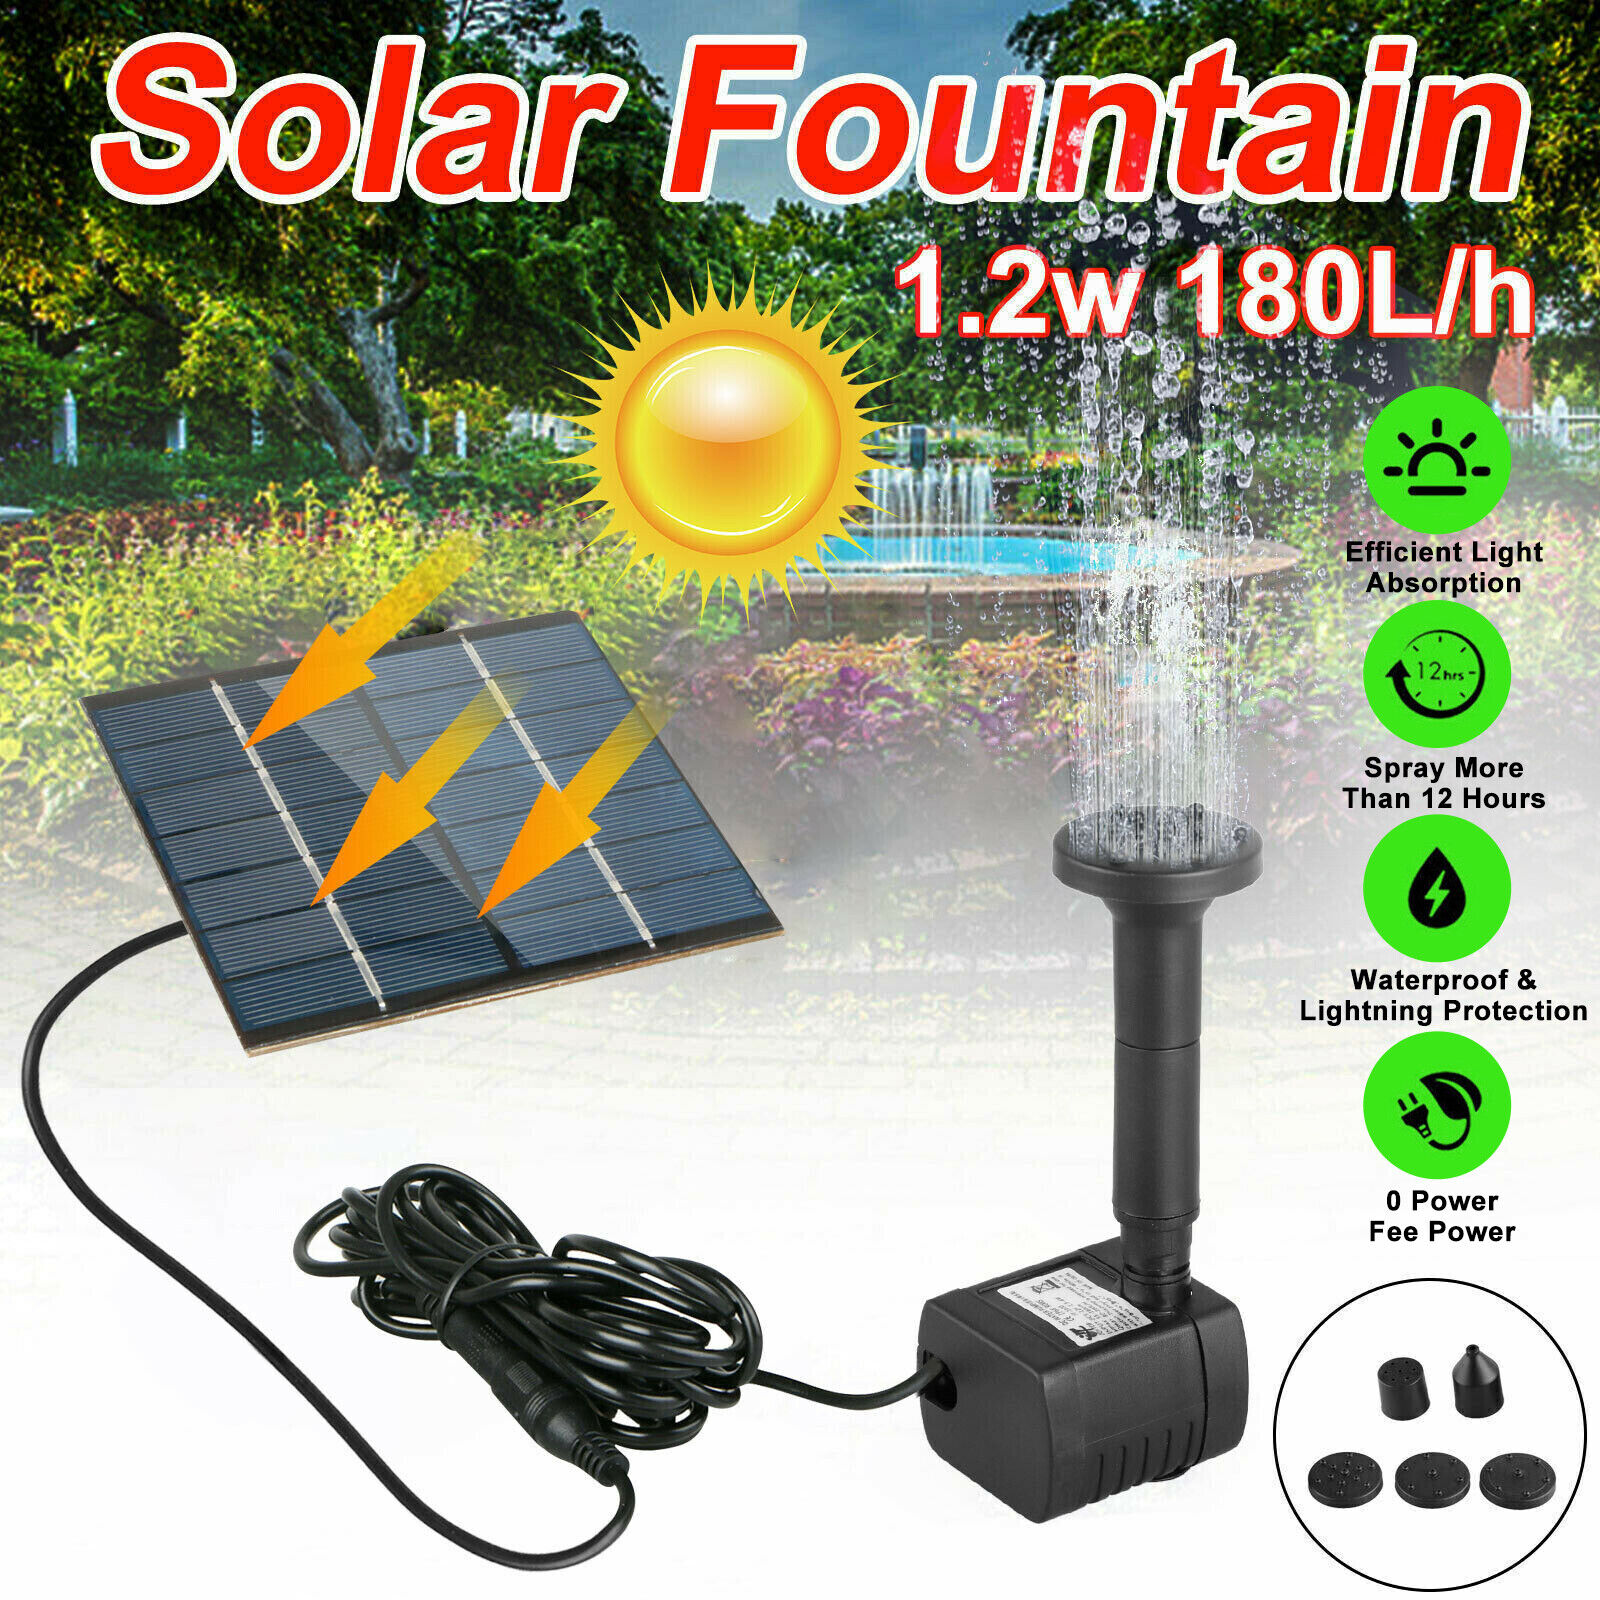 175L/h Solar Fountain Submersible Water Pump Kit Filter Panel Pool Garden Pond